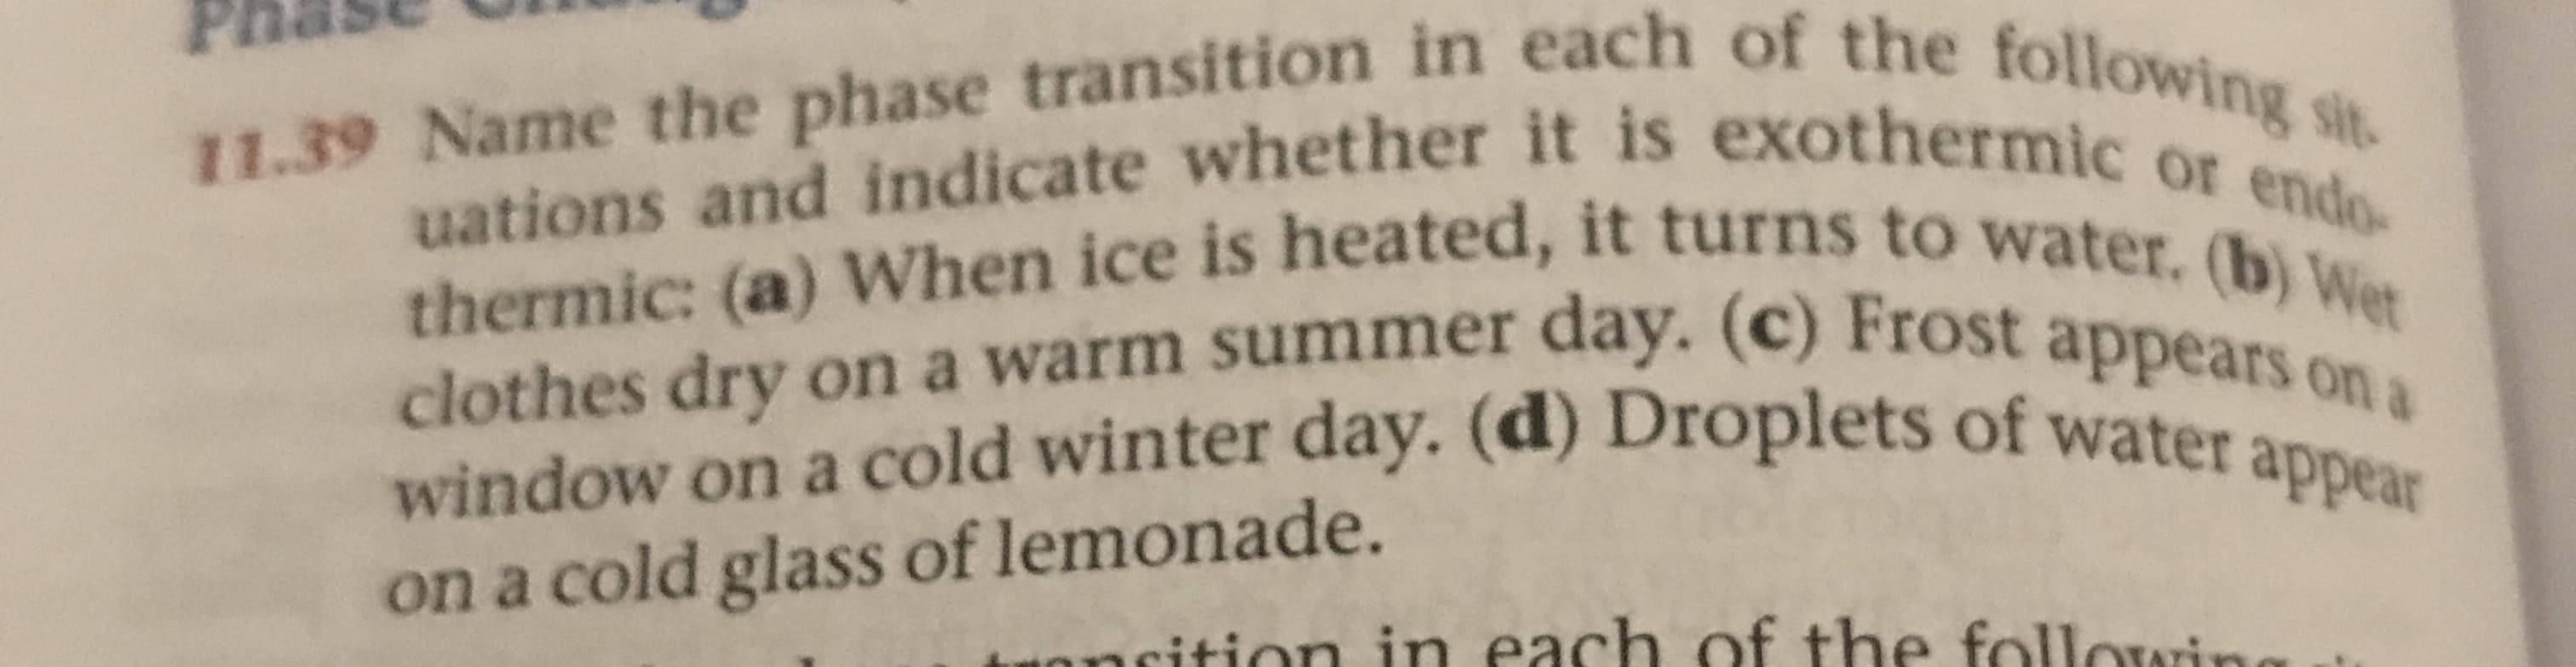 11.39 Name the phase transition in each of the following sit
uations and indicate whether it is exothermic or endo-
thermic: (a) When ice is heated, it turns to water. (b) Wet
clothes dry on a warm summer day. (c) Frost appears on a
window on a cold winter day. (d) Droplets of water appear
on a cold glass of lemonade.
oncition in each of the followine
